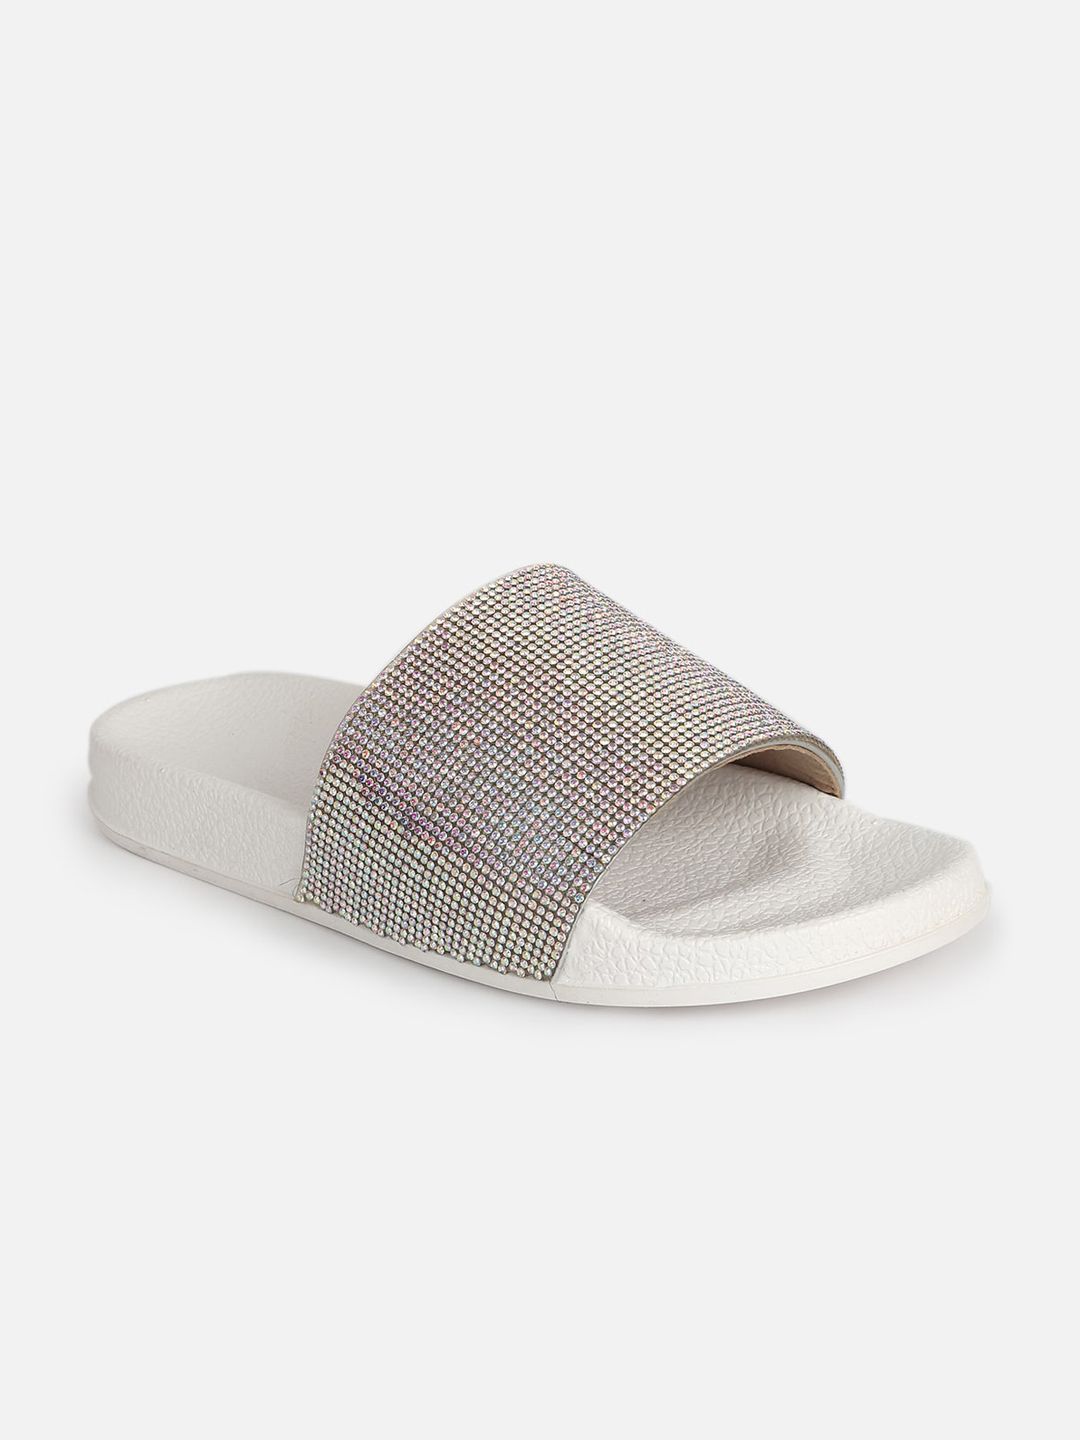 SCENTRA Women Silver-Toned Embellished Sliders Price in India